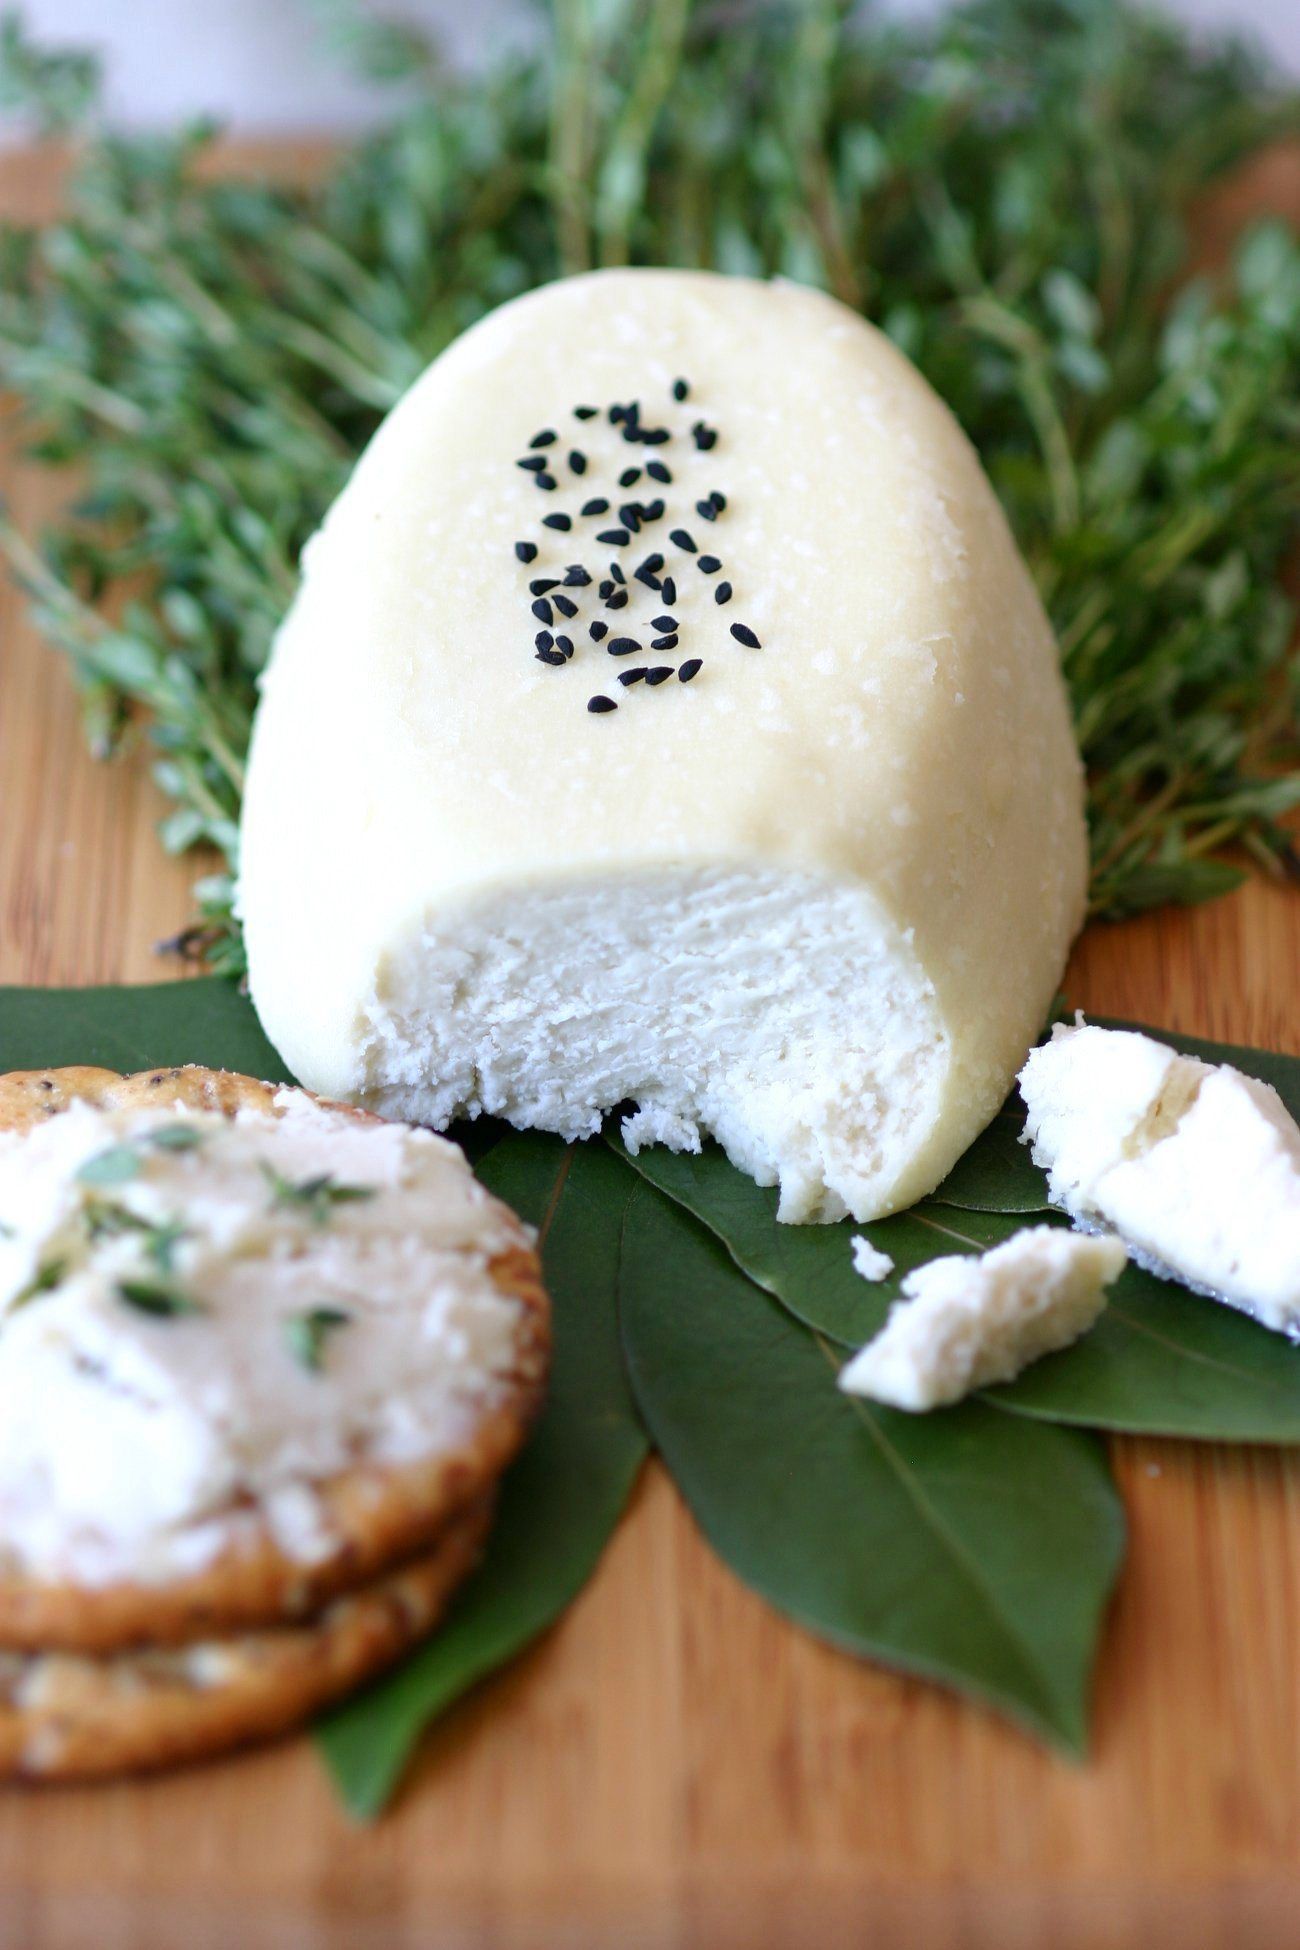 A 4-ingredient recipe for vegan basic almond cheese that can be enjoyed as is or crumbled on salads, pasta, or pizza.